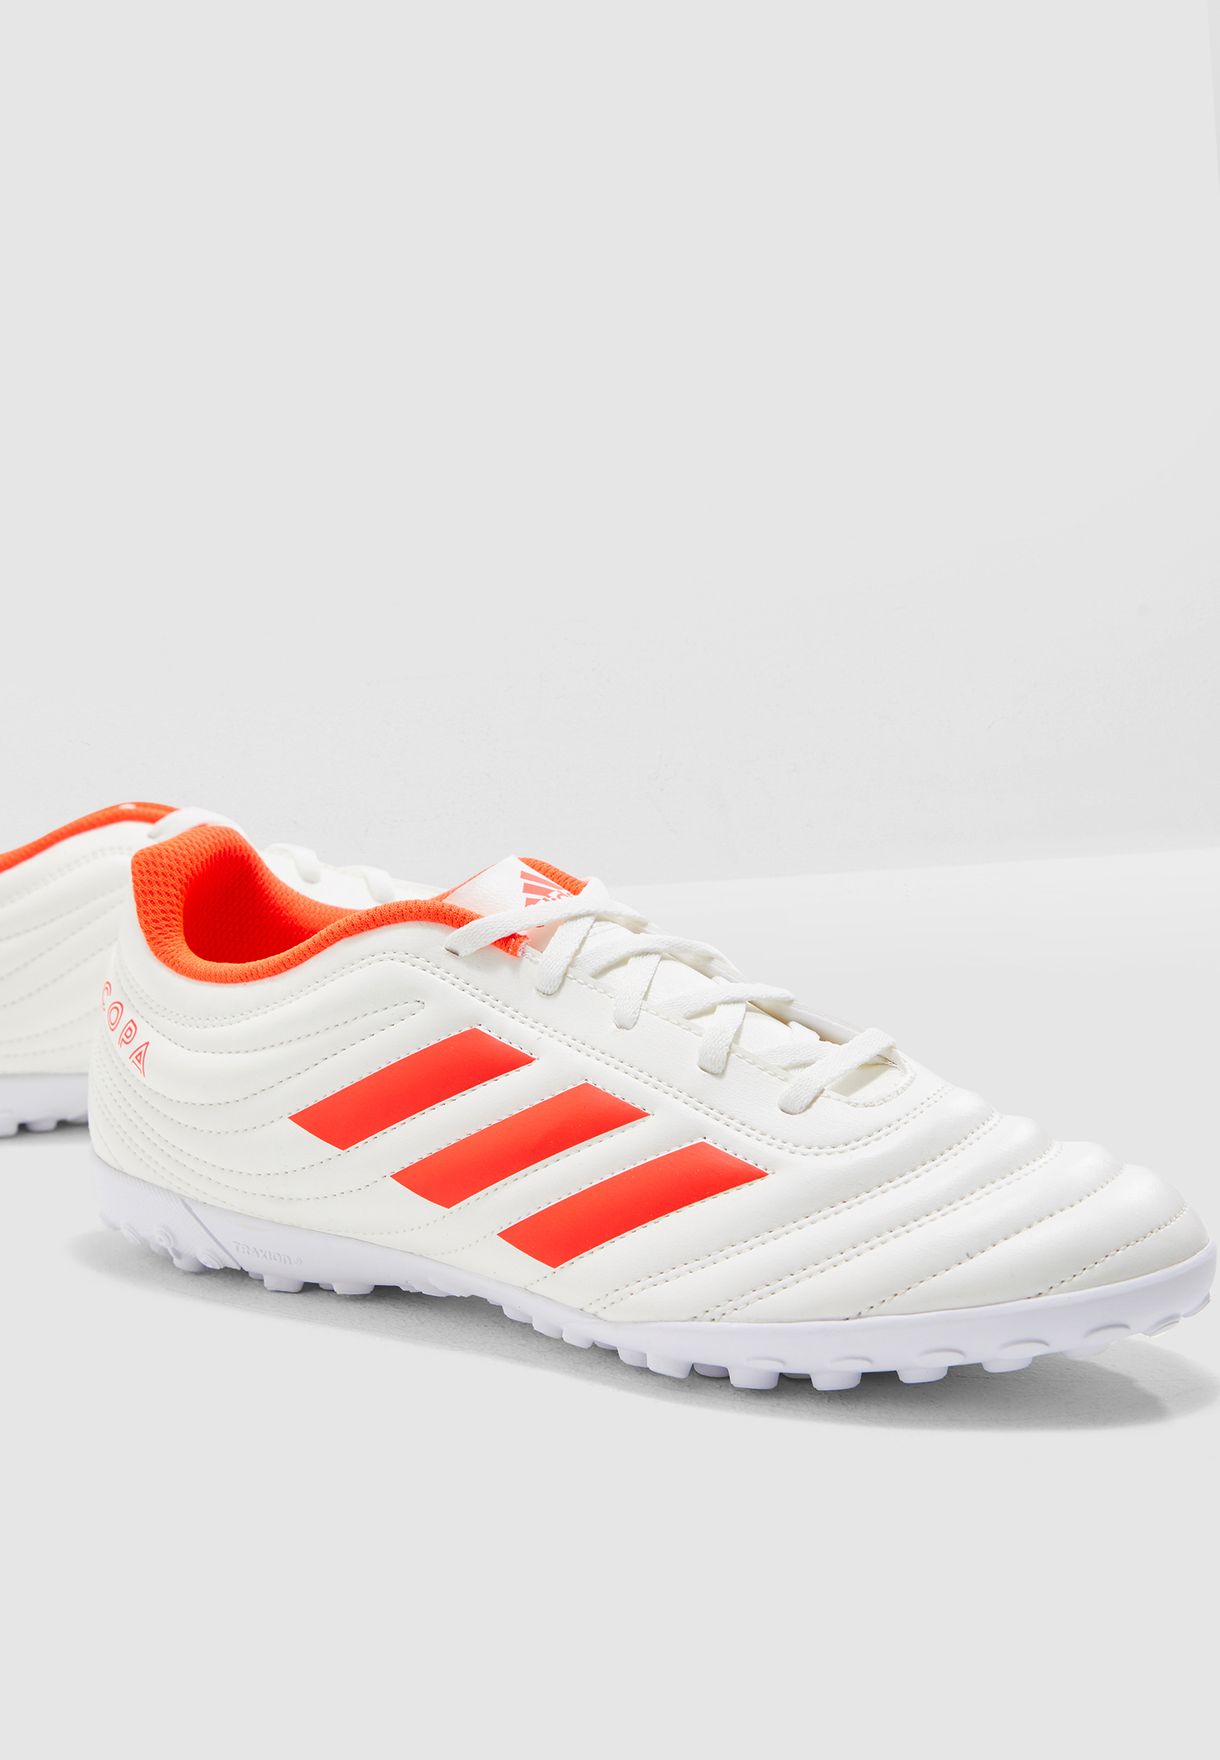 adidas copa 19.4 tf review